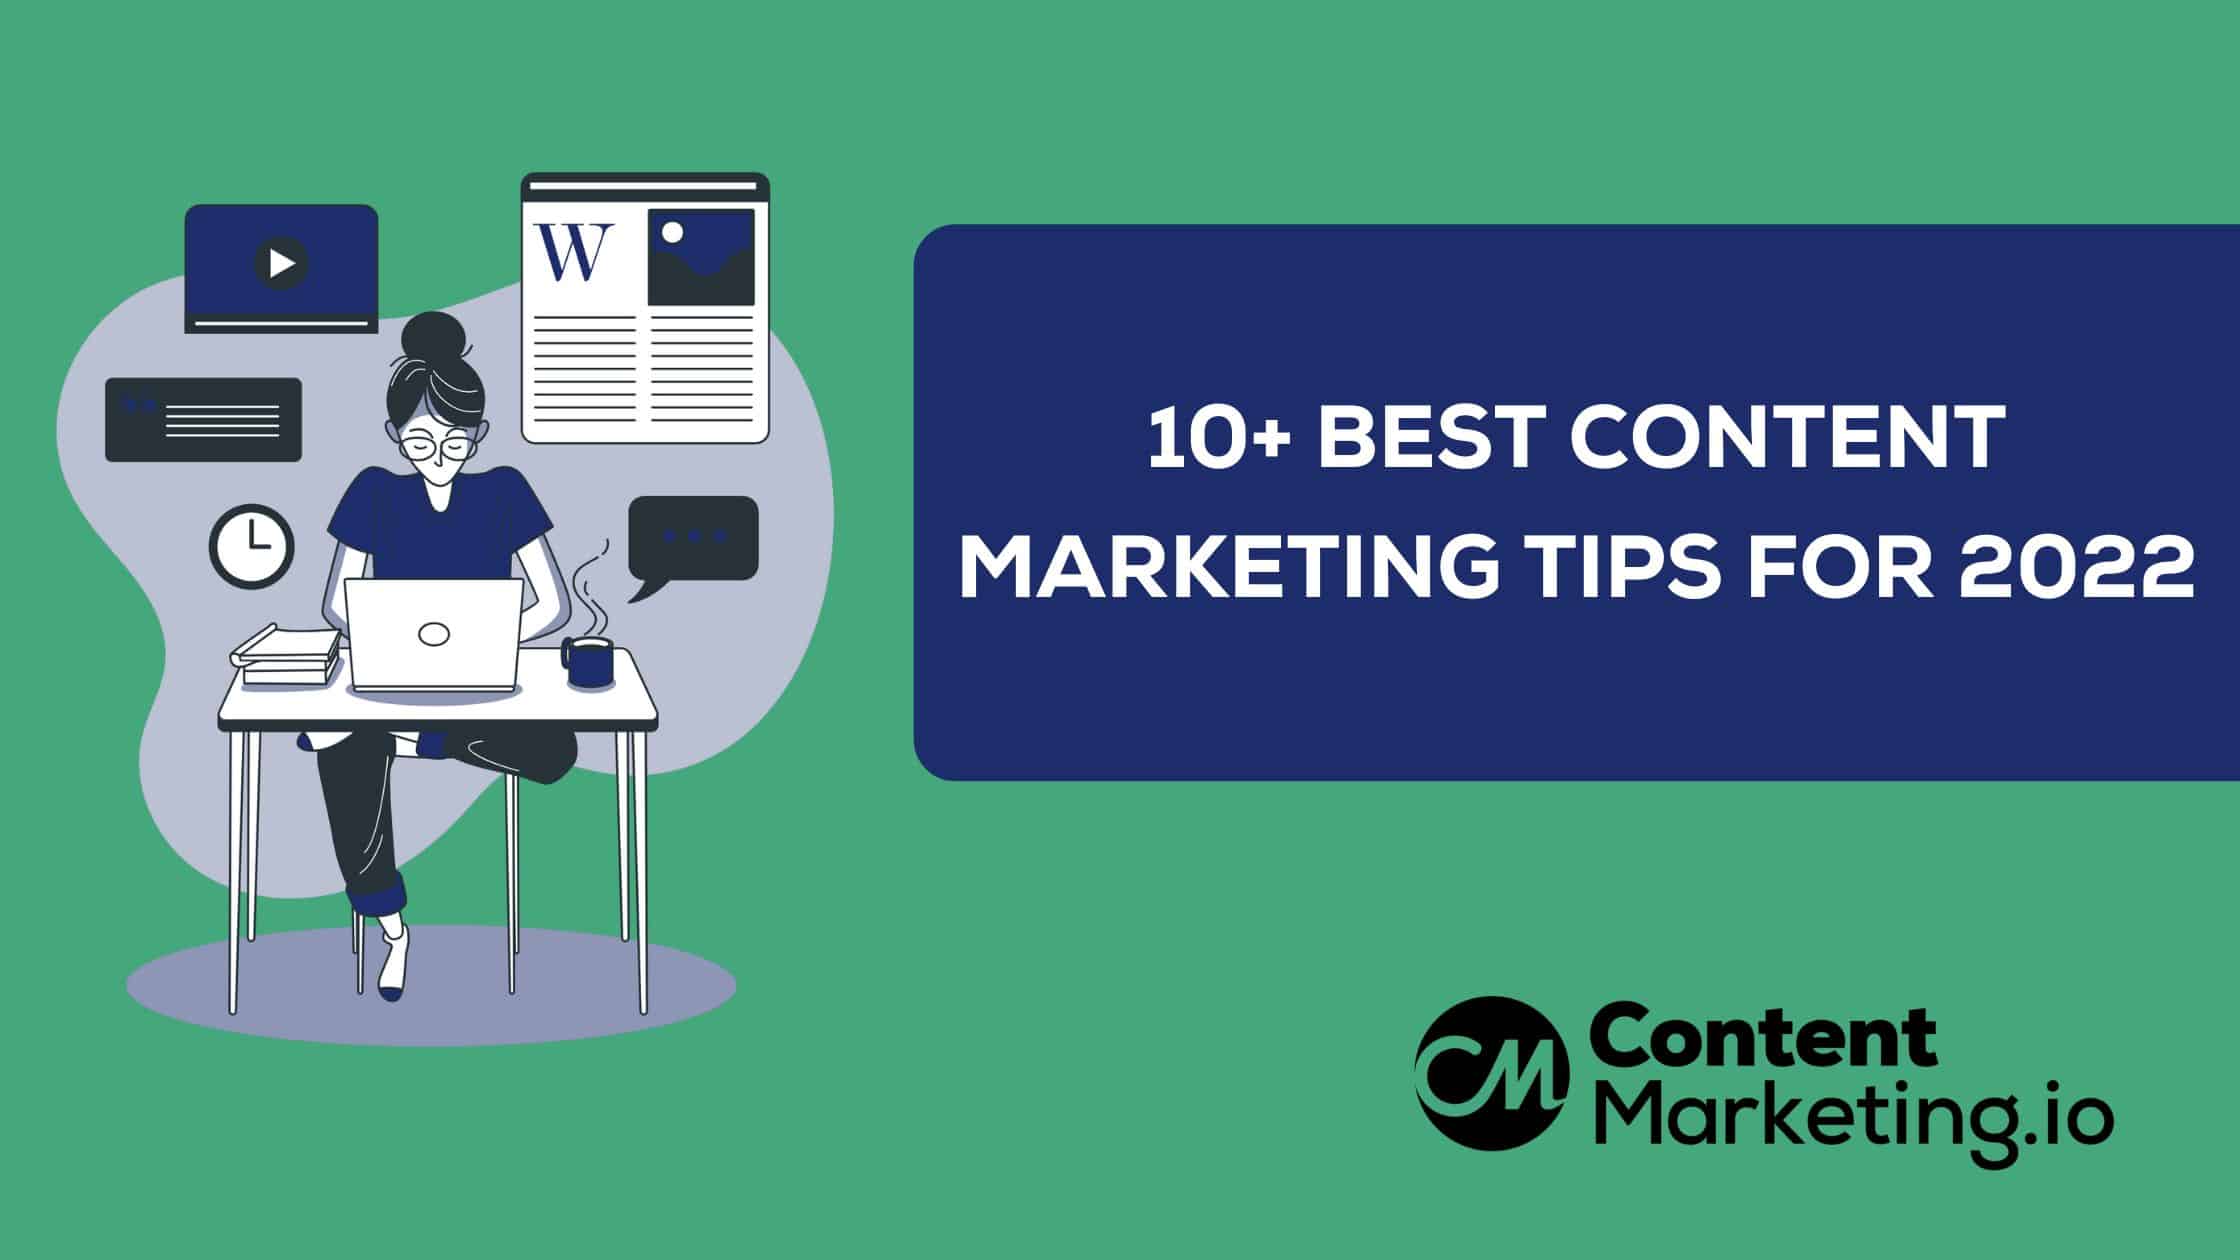 10+ Best Content Marketing Tips for 2022